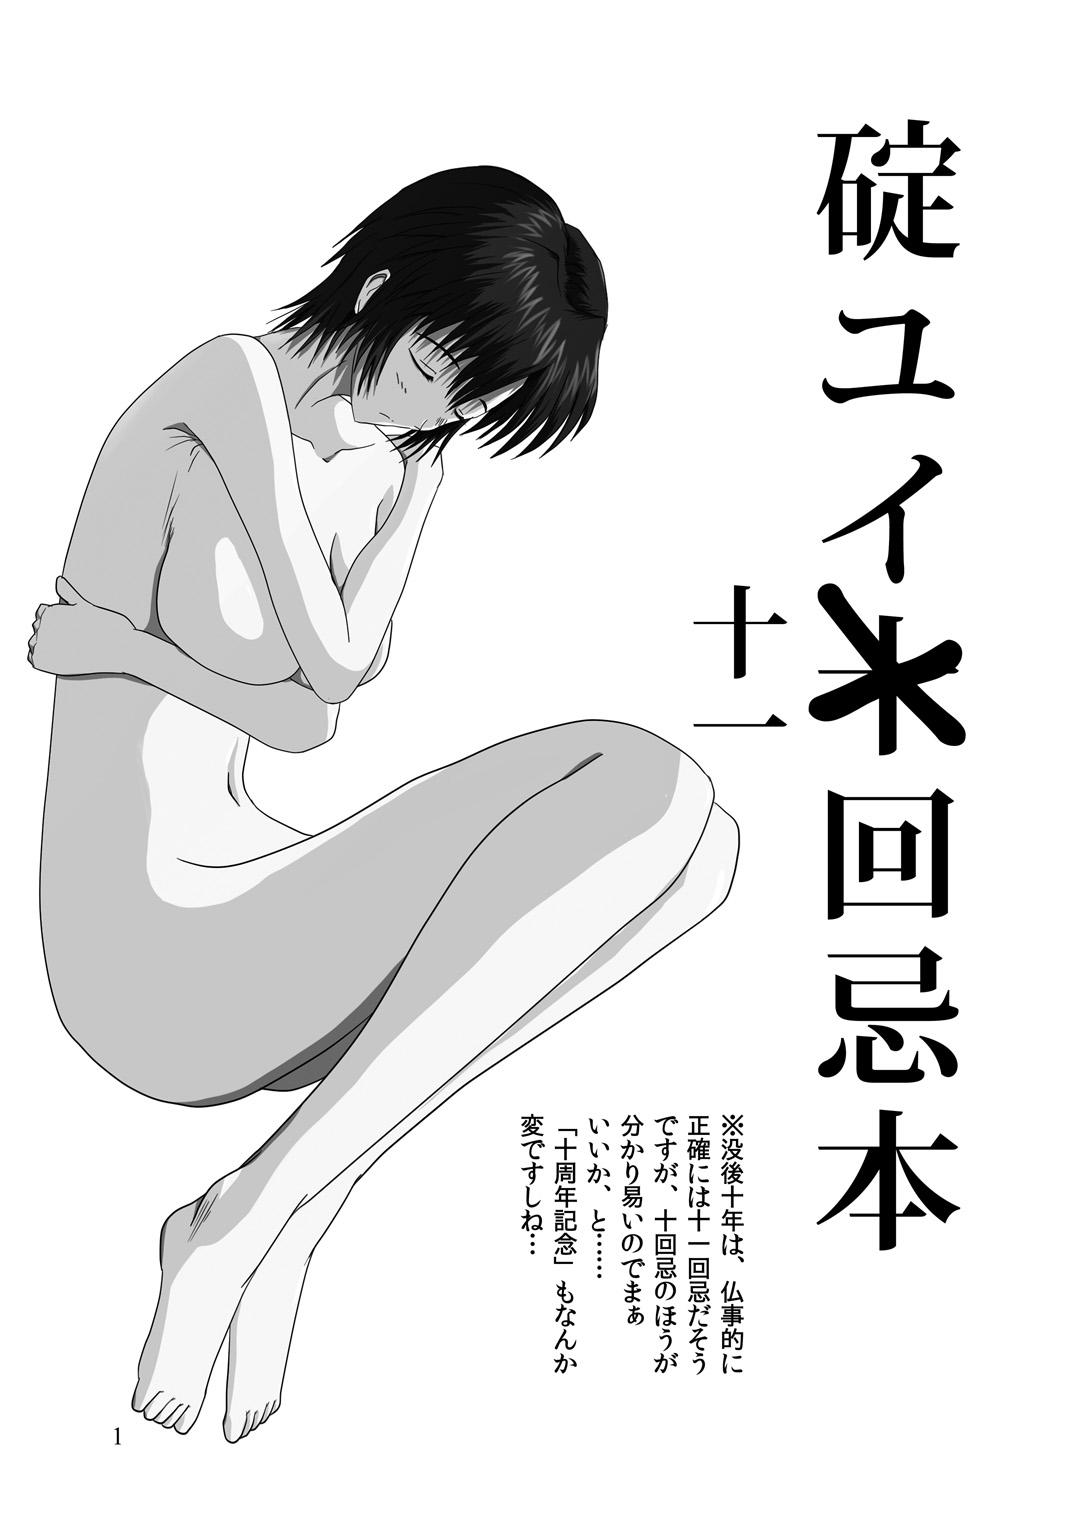 Livecams Yui Ikari 10th Anniversary Book - beyond the time - Neon genesis evangelion Transexual - Picture 2